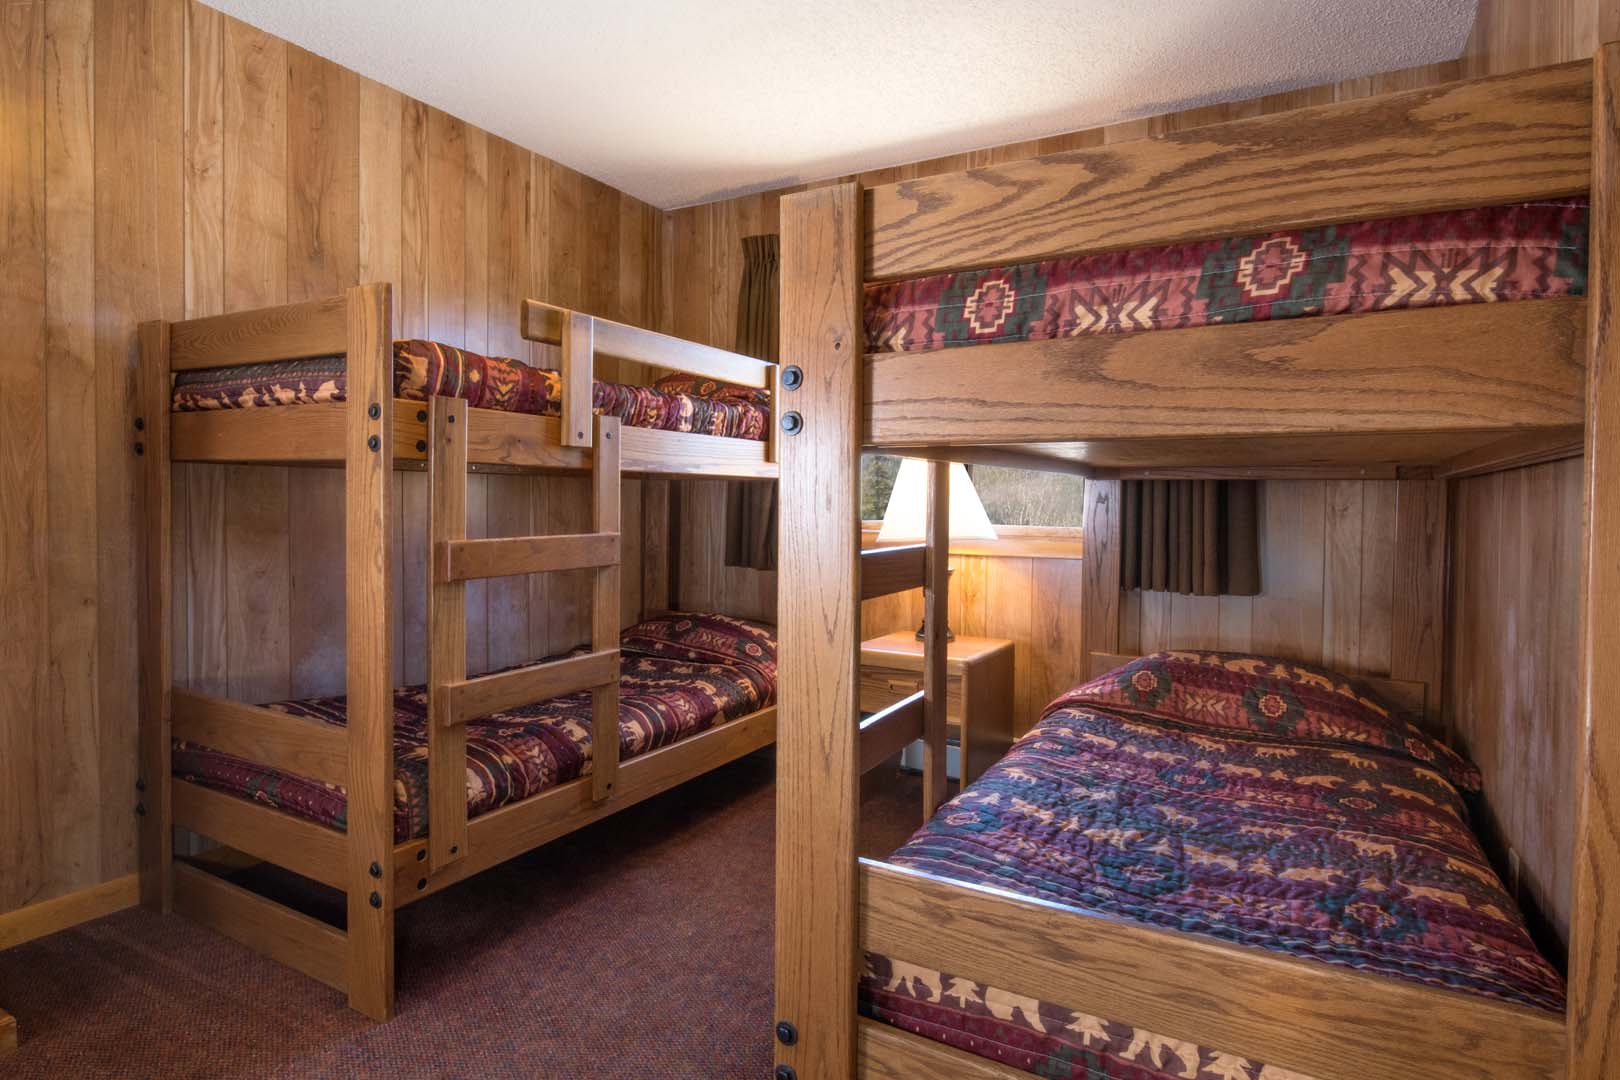 2 sets of bunk beds in cabin